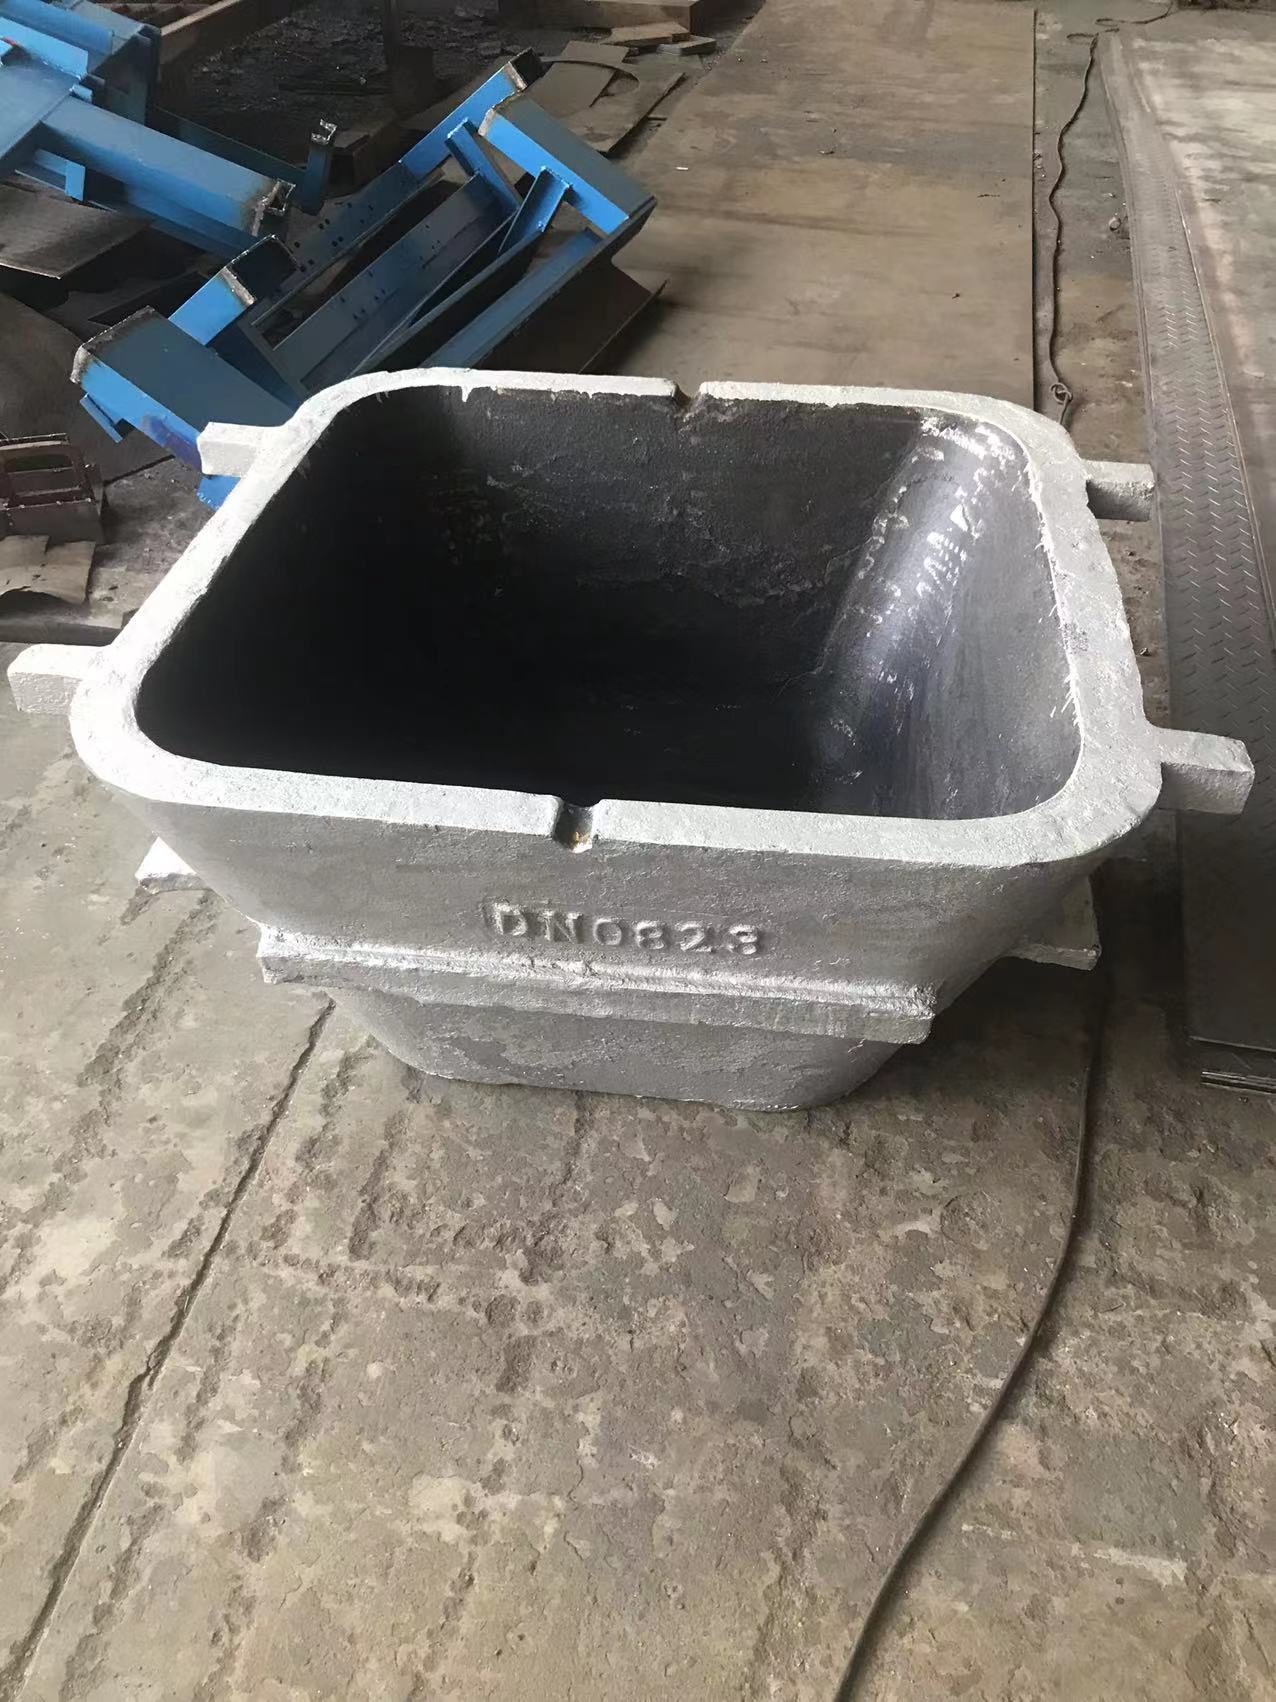 China customized design scrap lead crude ingot molds for casting metal  manufacturers, suppliers, factory - Lufeng Machinery